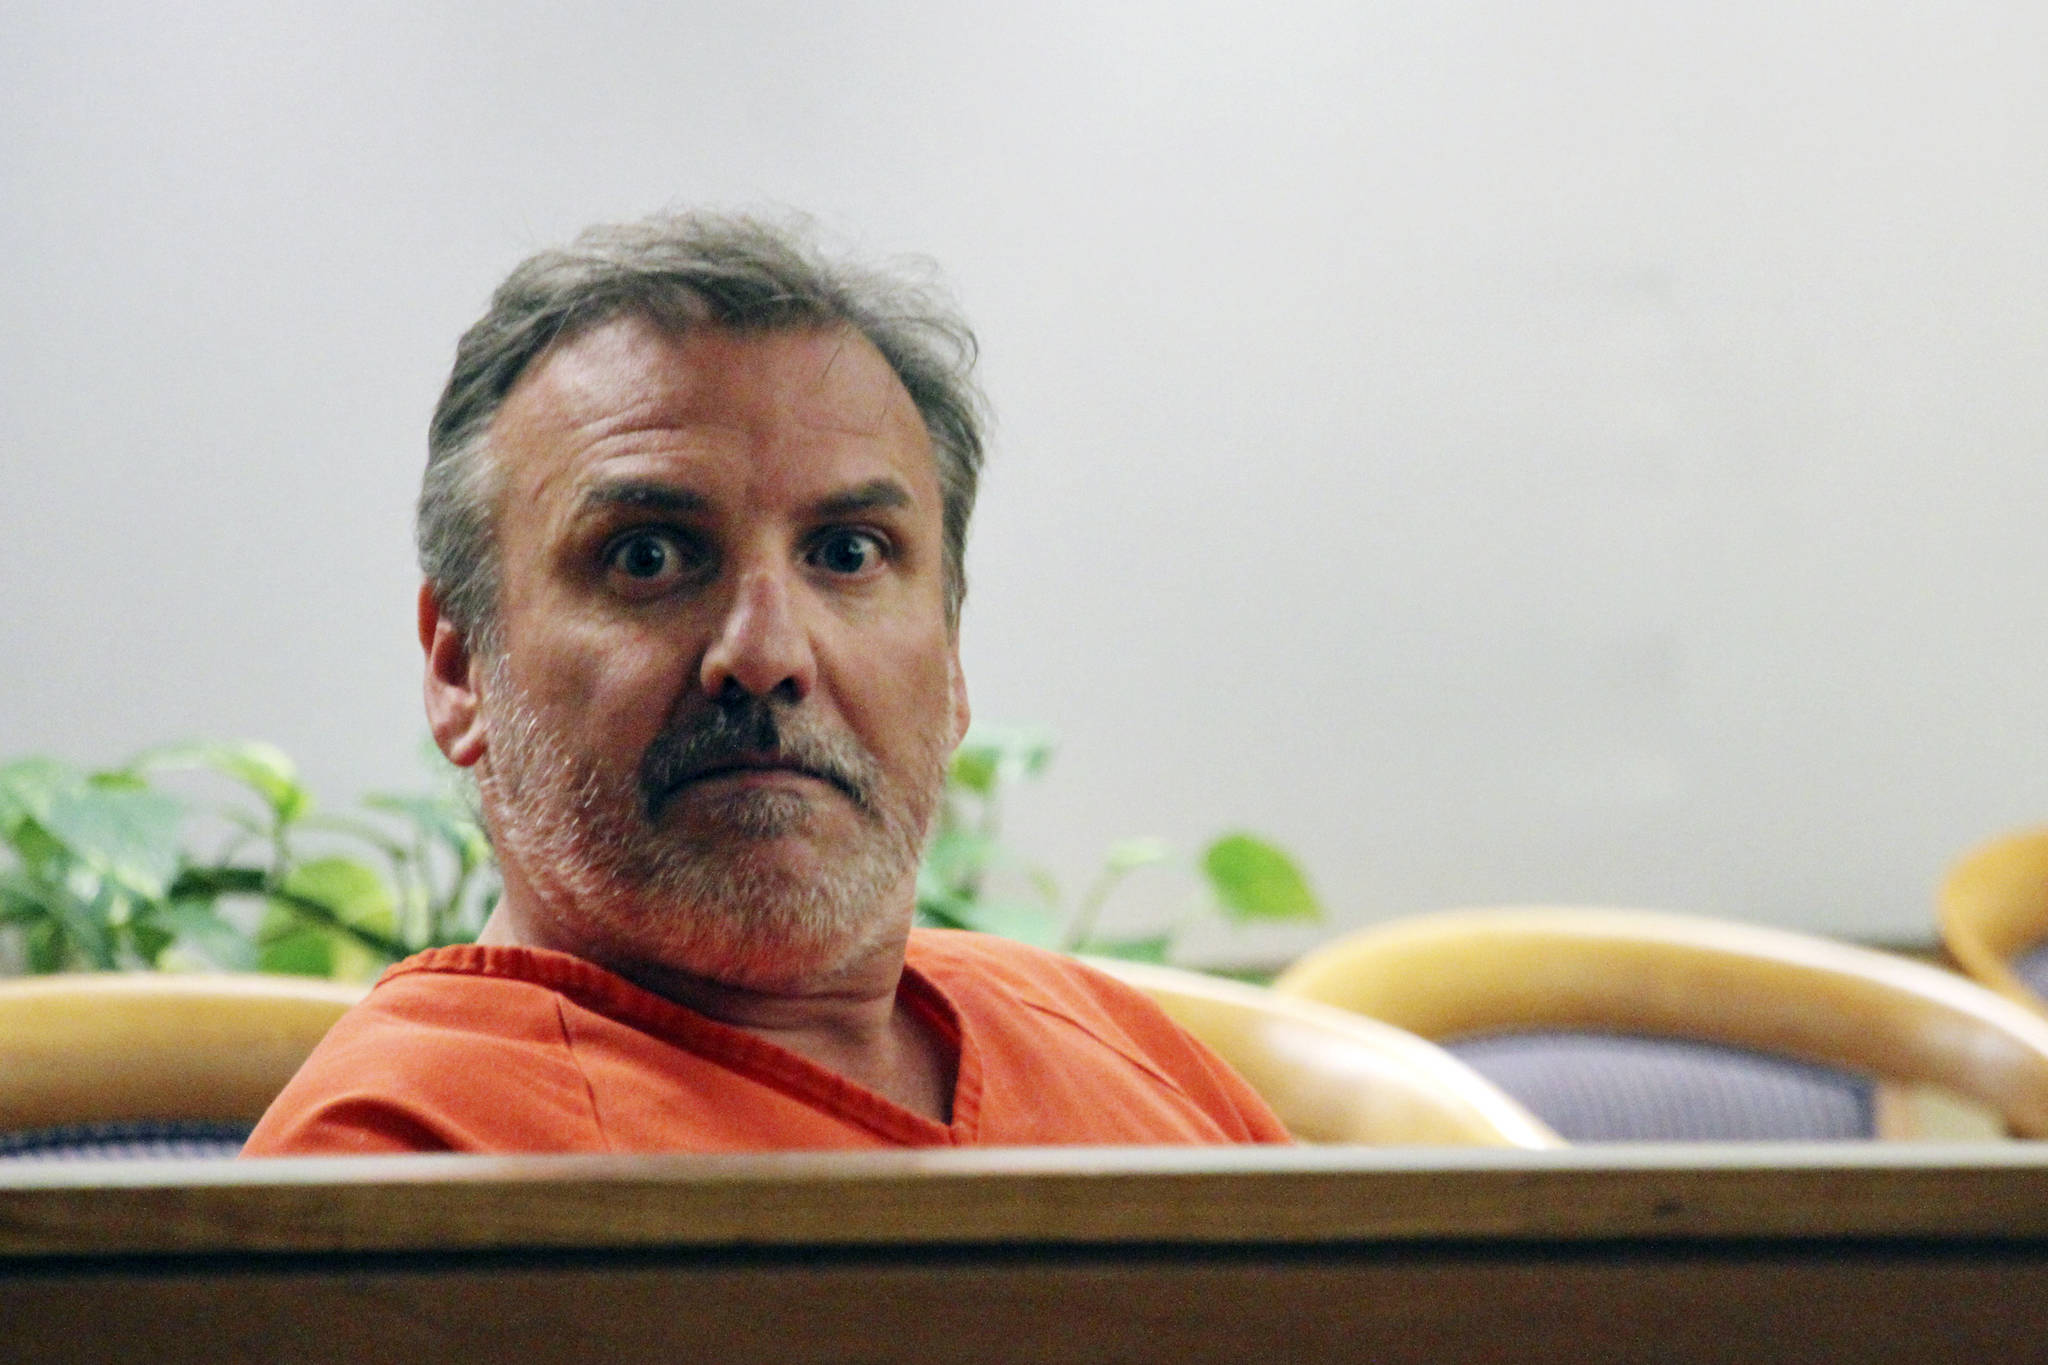 Brian Steven Smith looks out in the courtroom while waiting for his arraignment to start Wednesday, Oct. 16, 2019, in Anchorage, Alaska. A public defender entered not guilty pleas for Smith, who is accused of documenting the assault and murder of Kathleen Henry in an Anchorage hotel. (AP Photo/Mark Thiessen)